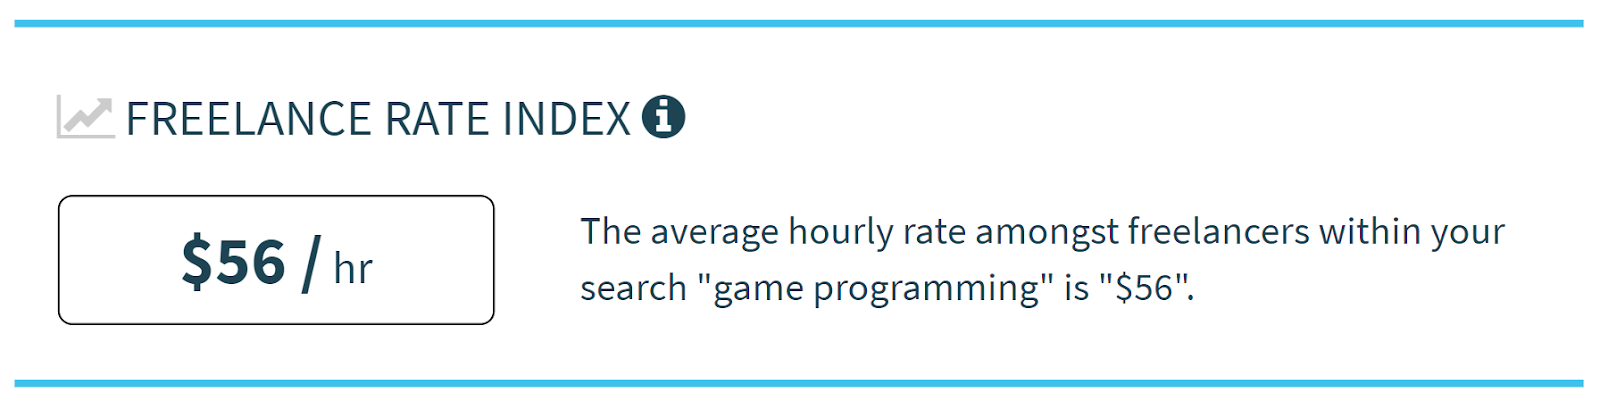 Average hourly rate for a freelance game programmer